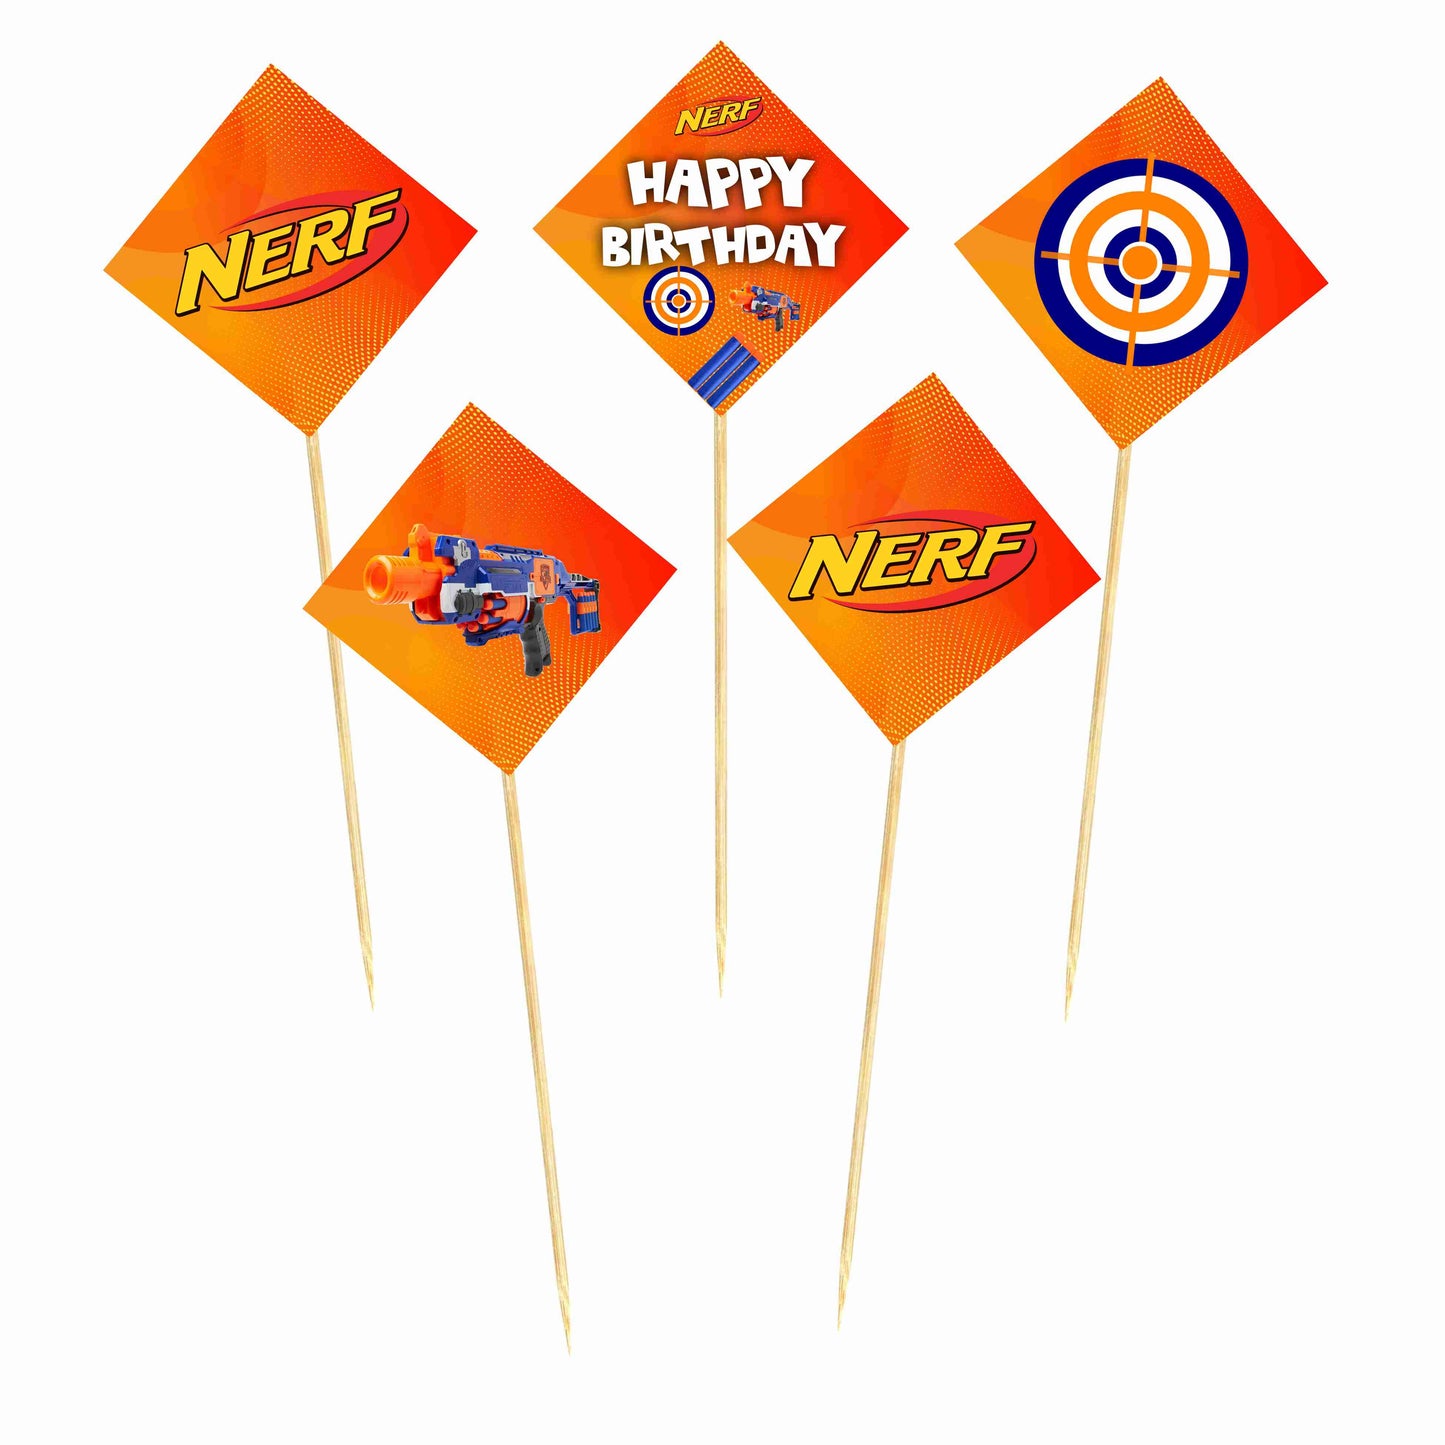 Nerf Theme Cake Topper Pack of 10 Nos for Birthday Cake Decoration Theme Party Item For Boys Girls Adults Birthday Theme Decor